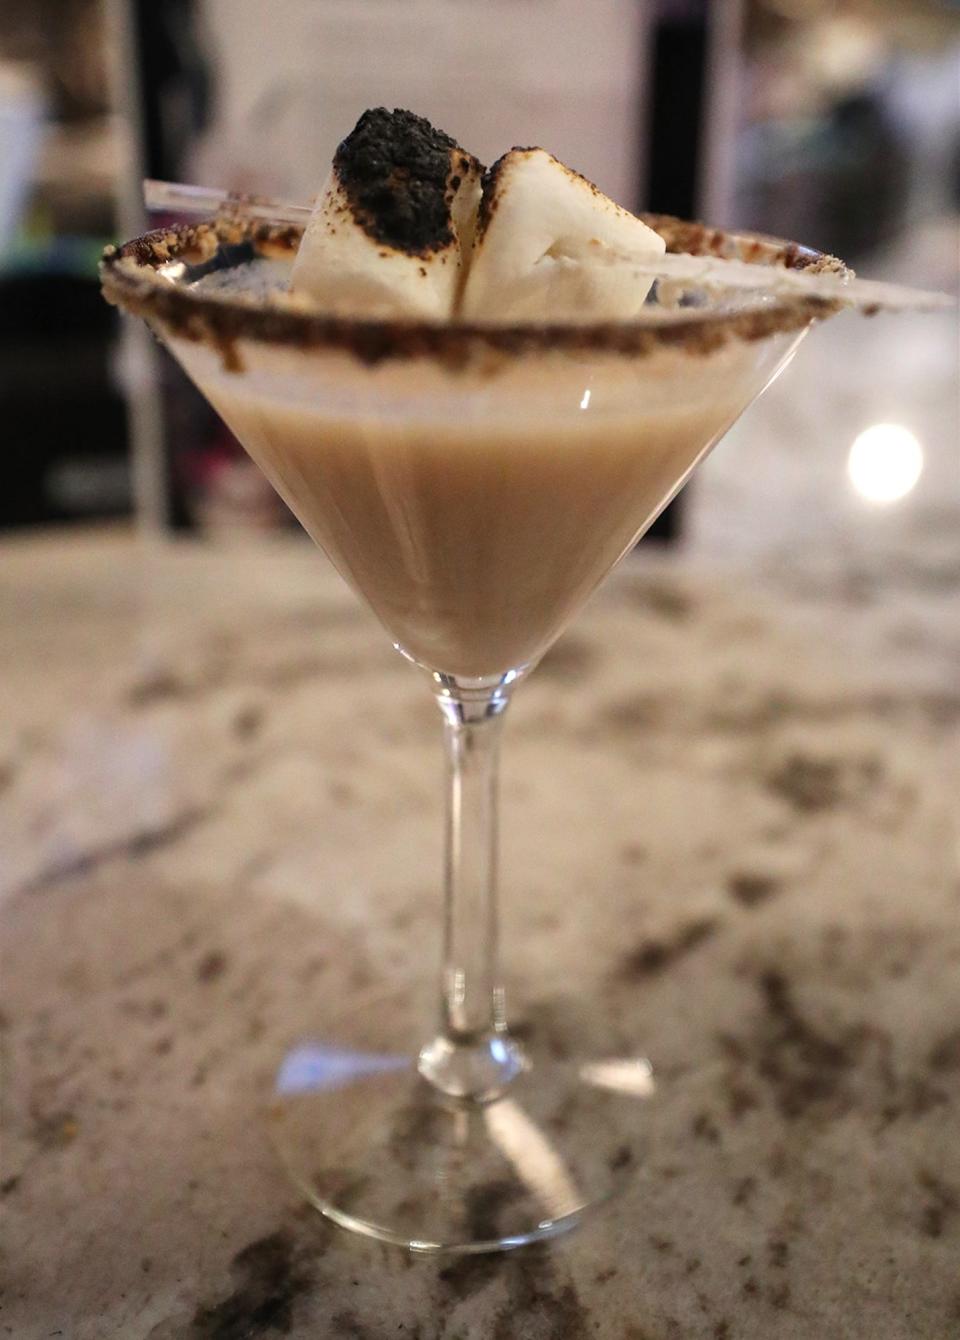 The S'mores Martini, made with Godiva chocolate liqueur, marshmallow vodka, heavy cream, Hershey's chocolate syrup and topped with toasted marshmallows, is one of the Halloween-themed cocktails at The Daily Pressed, which has created a Halloween pop-up bar.